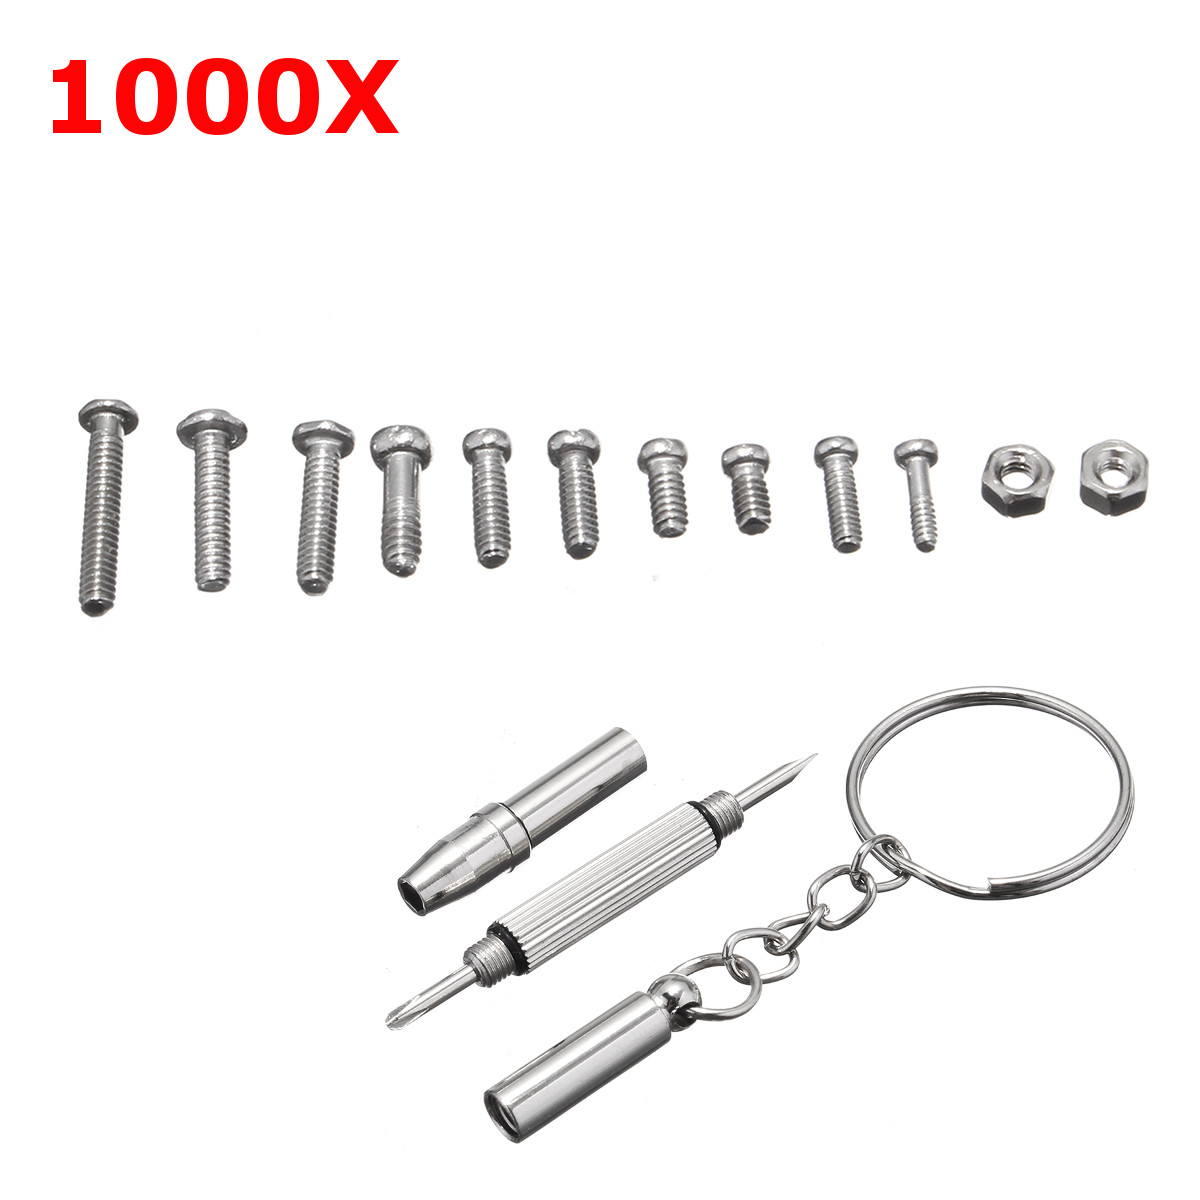 

1000Pcs Micro Tiny Screws Nut Repair Kit with Tools for Eyeglasses Sunglass Spectacles